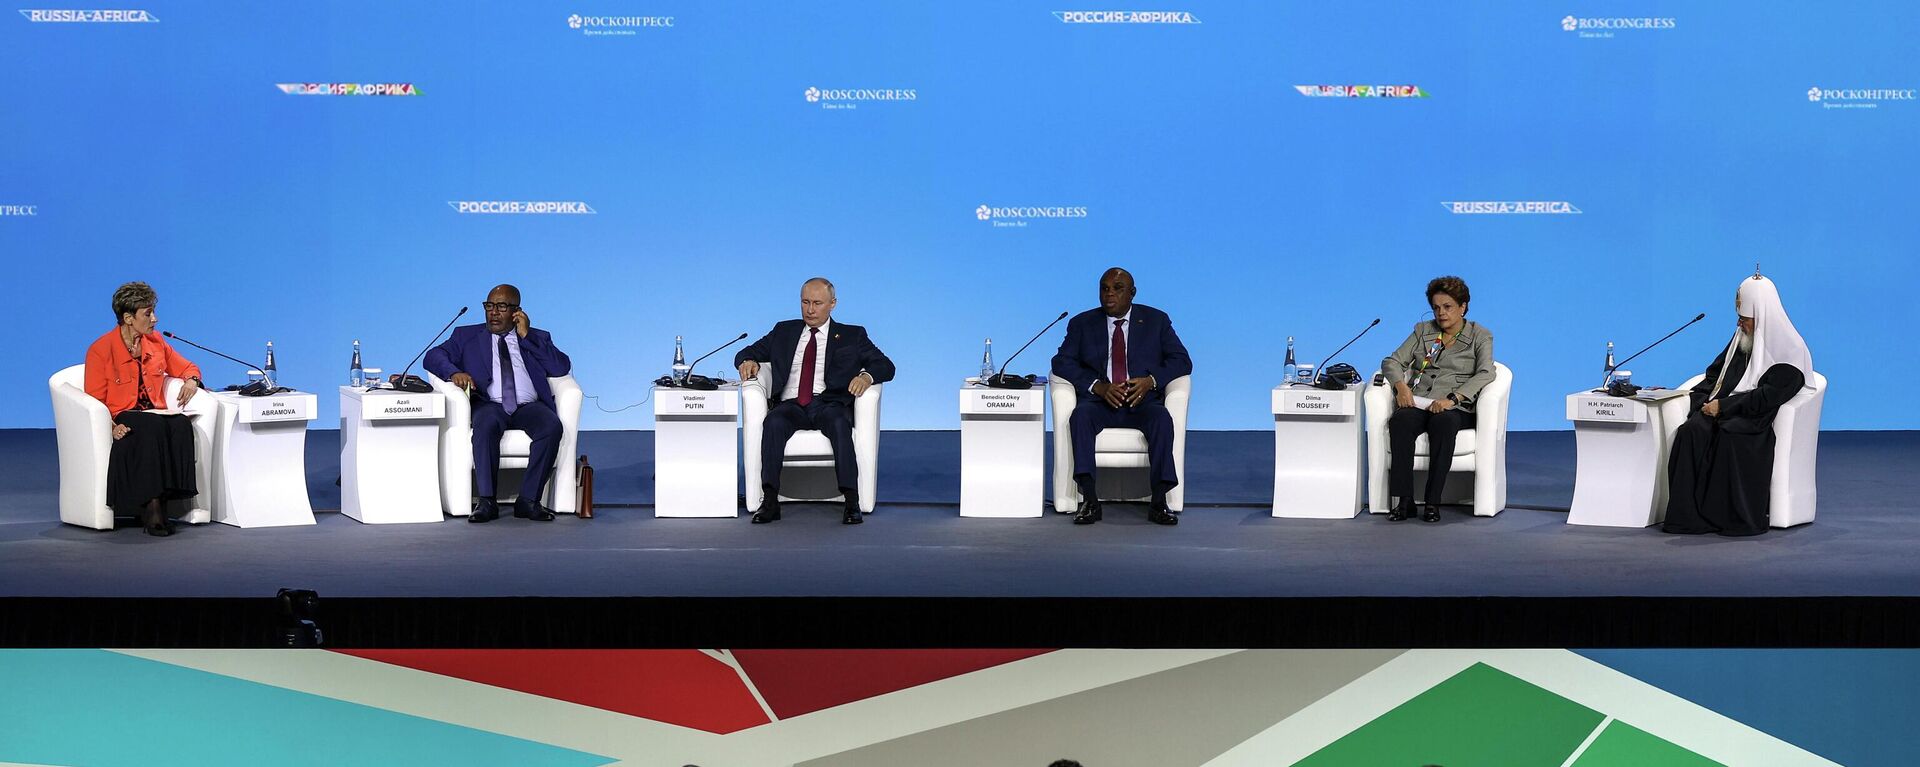 From left: Director of the Institute for African Studies at the Russian Academy of Sciences Irina Abramova, African Union Chairman, President of the Union of the Comoros Azali Assoumani, Russian President Vladimir Putin, Chairman of the Board of Directors at African Export-Import Bank (Afreximbank) Benedict Okey Oramah, New Development Bank President Dilma Rousseff and head of the Russian Orthodox Church Patriarch Kirill attend a plenary session of the Russia-Africa Summit and Economic and Humanitarian Forum in St. Petersburg, Russia, Thursday, July 27, 2023.  - Sputnik Africa, 1920, 16.08.2023